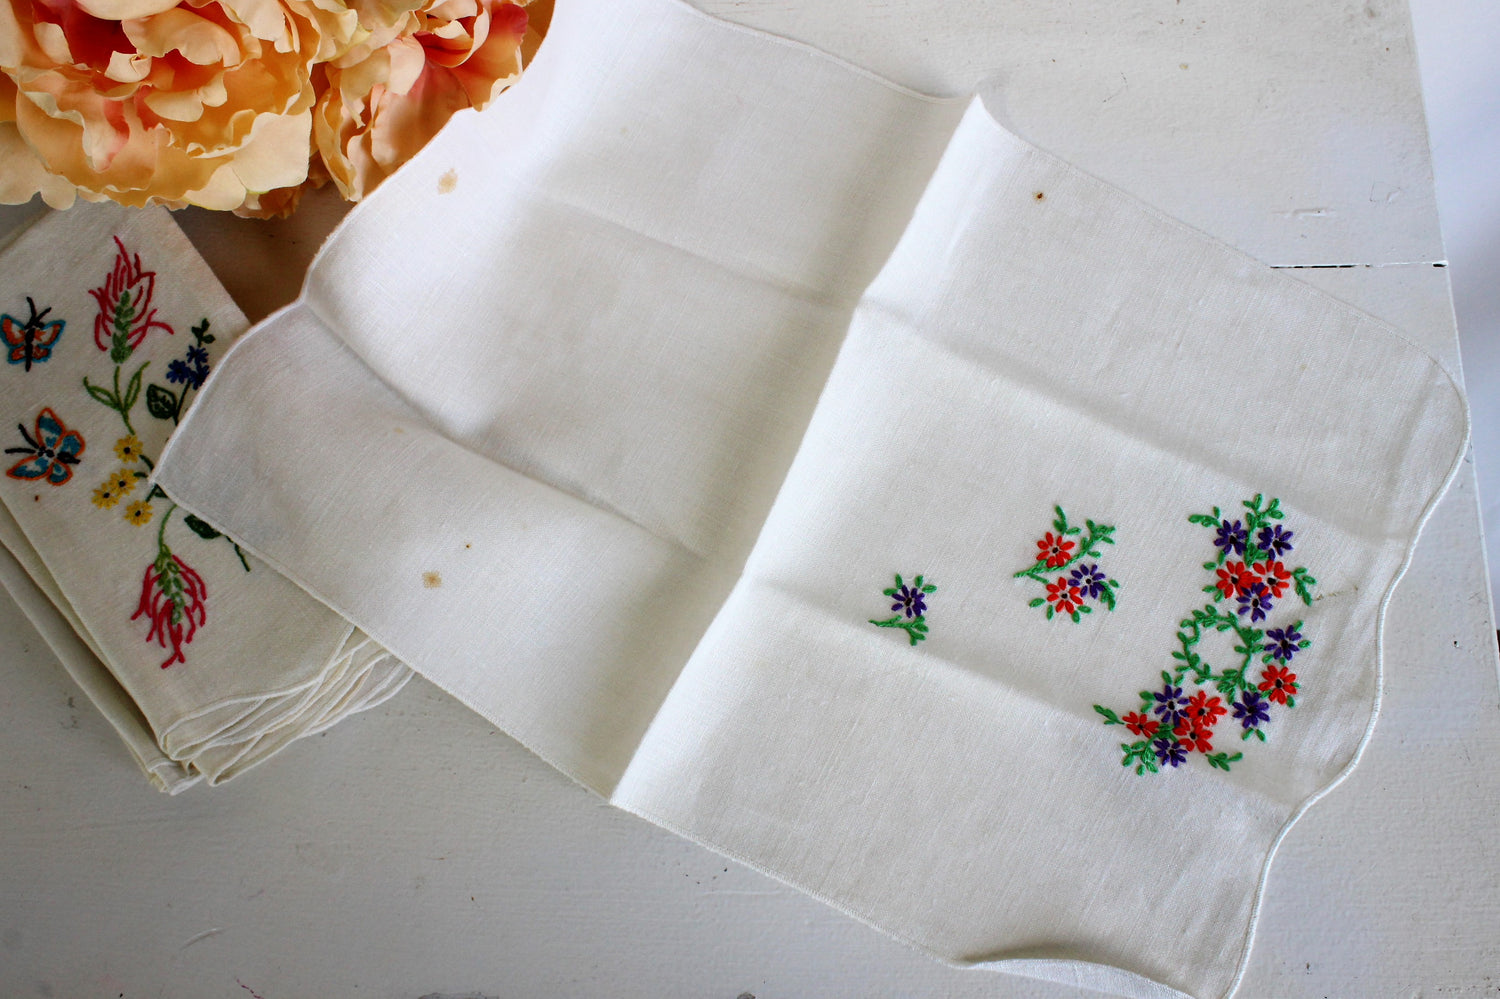 Vintage 1960s Linen Tea Towels, Embroidered With Flowers, Birds, Butterflies